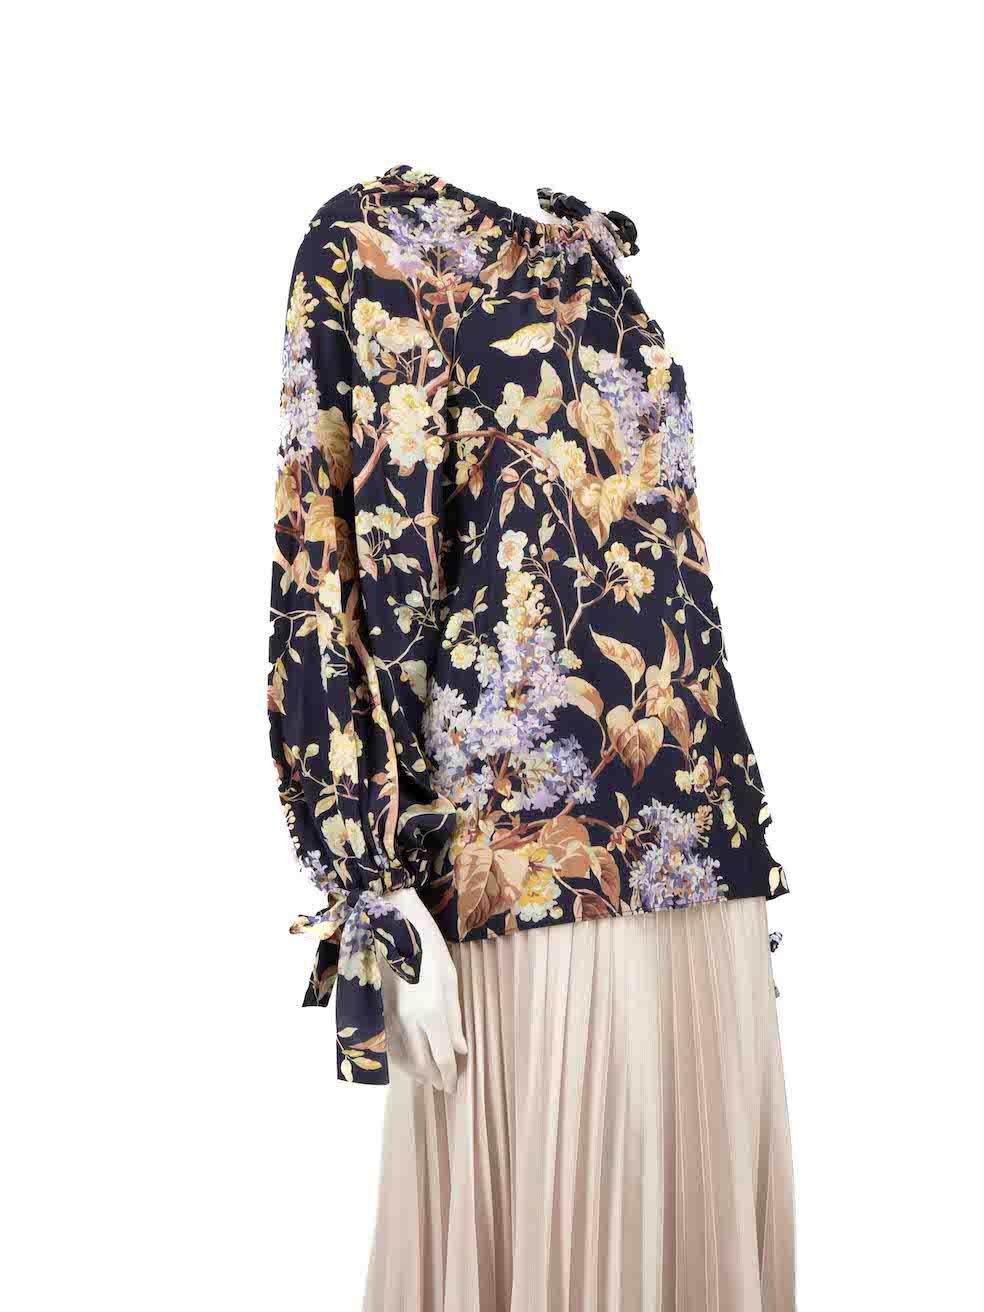 CONDITION is Very good. Hardly any visible wear to the blouse is evident on this used Zimmermann designer resale item.
 
 
 
 Details
 
 
 Multicolour- navy tone
 
 Silk
 
 Blouse
 
 Floral print
 
 Long puff sleeves
 
 Drawstring cuffs
 
